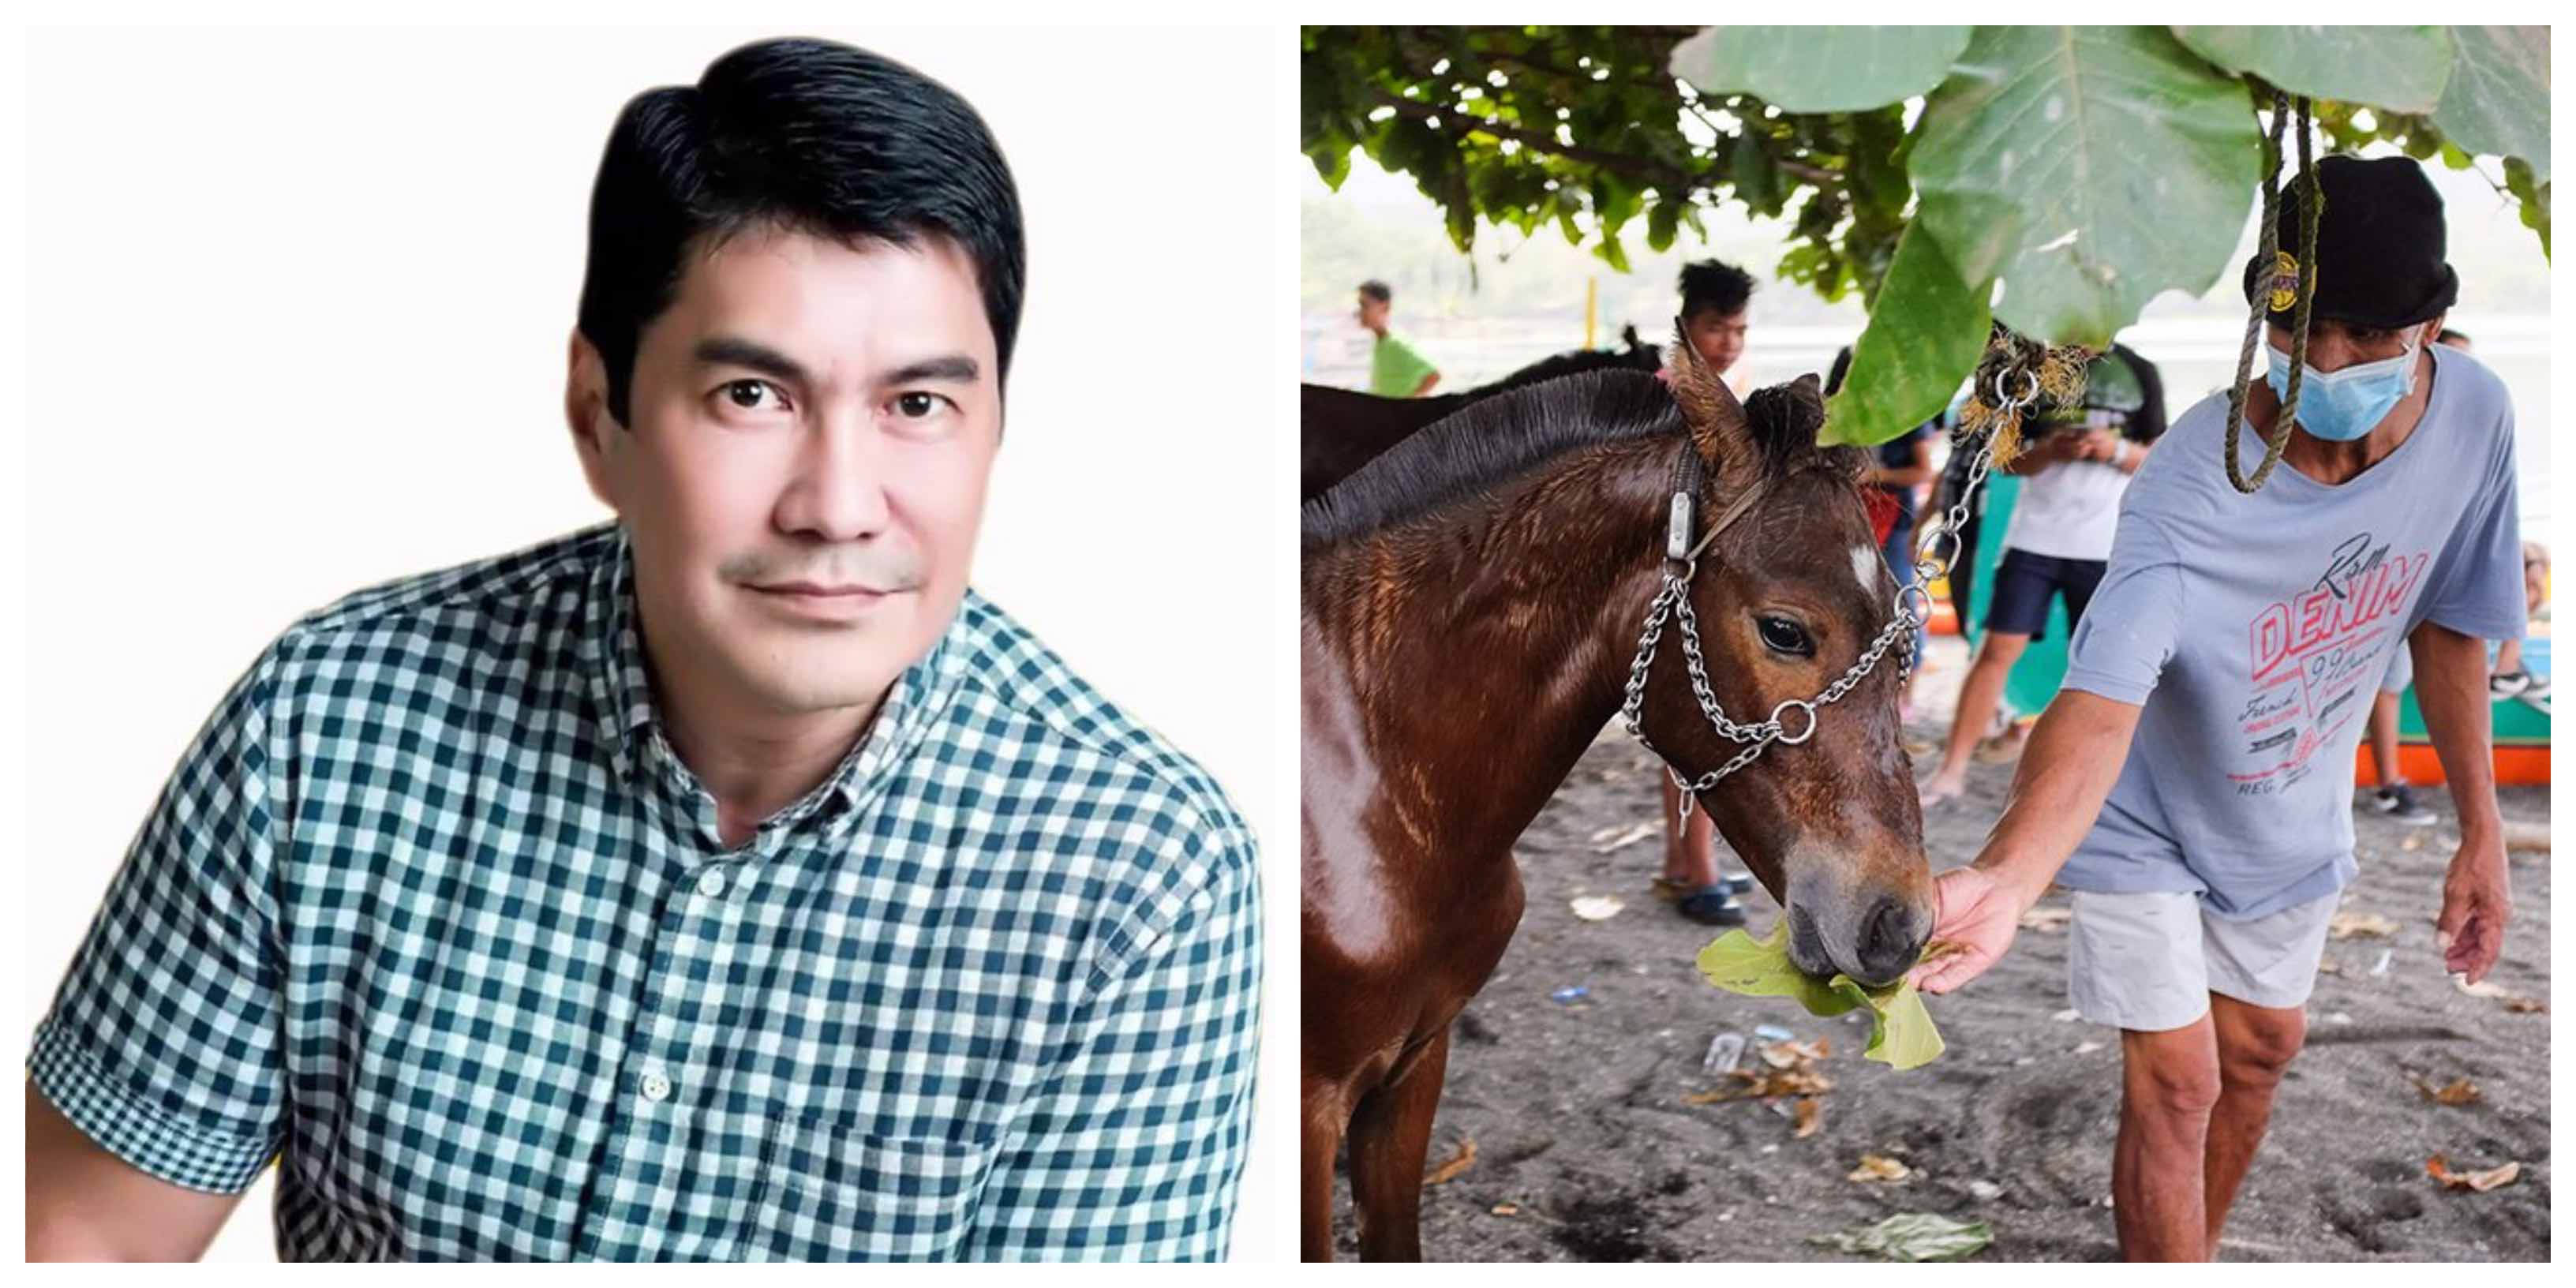 On left, broadcaster Erwin Tulfo; beside him, a man feeds his horse in Batangas amid this week’s Taal evacuations. <i></noscript>Photo: ABS-CBN News, Erwin Tulfo / FB</i>